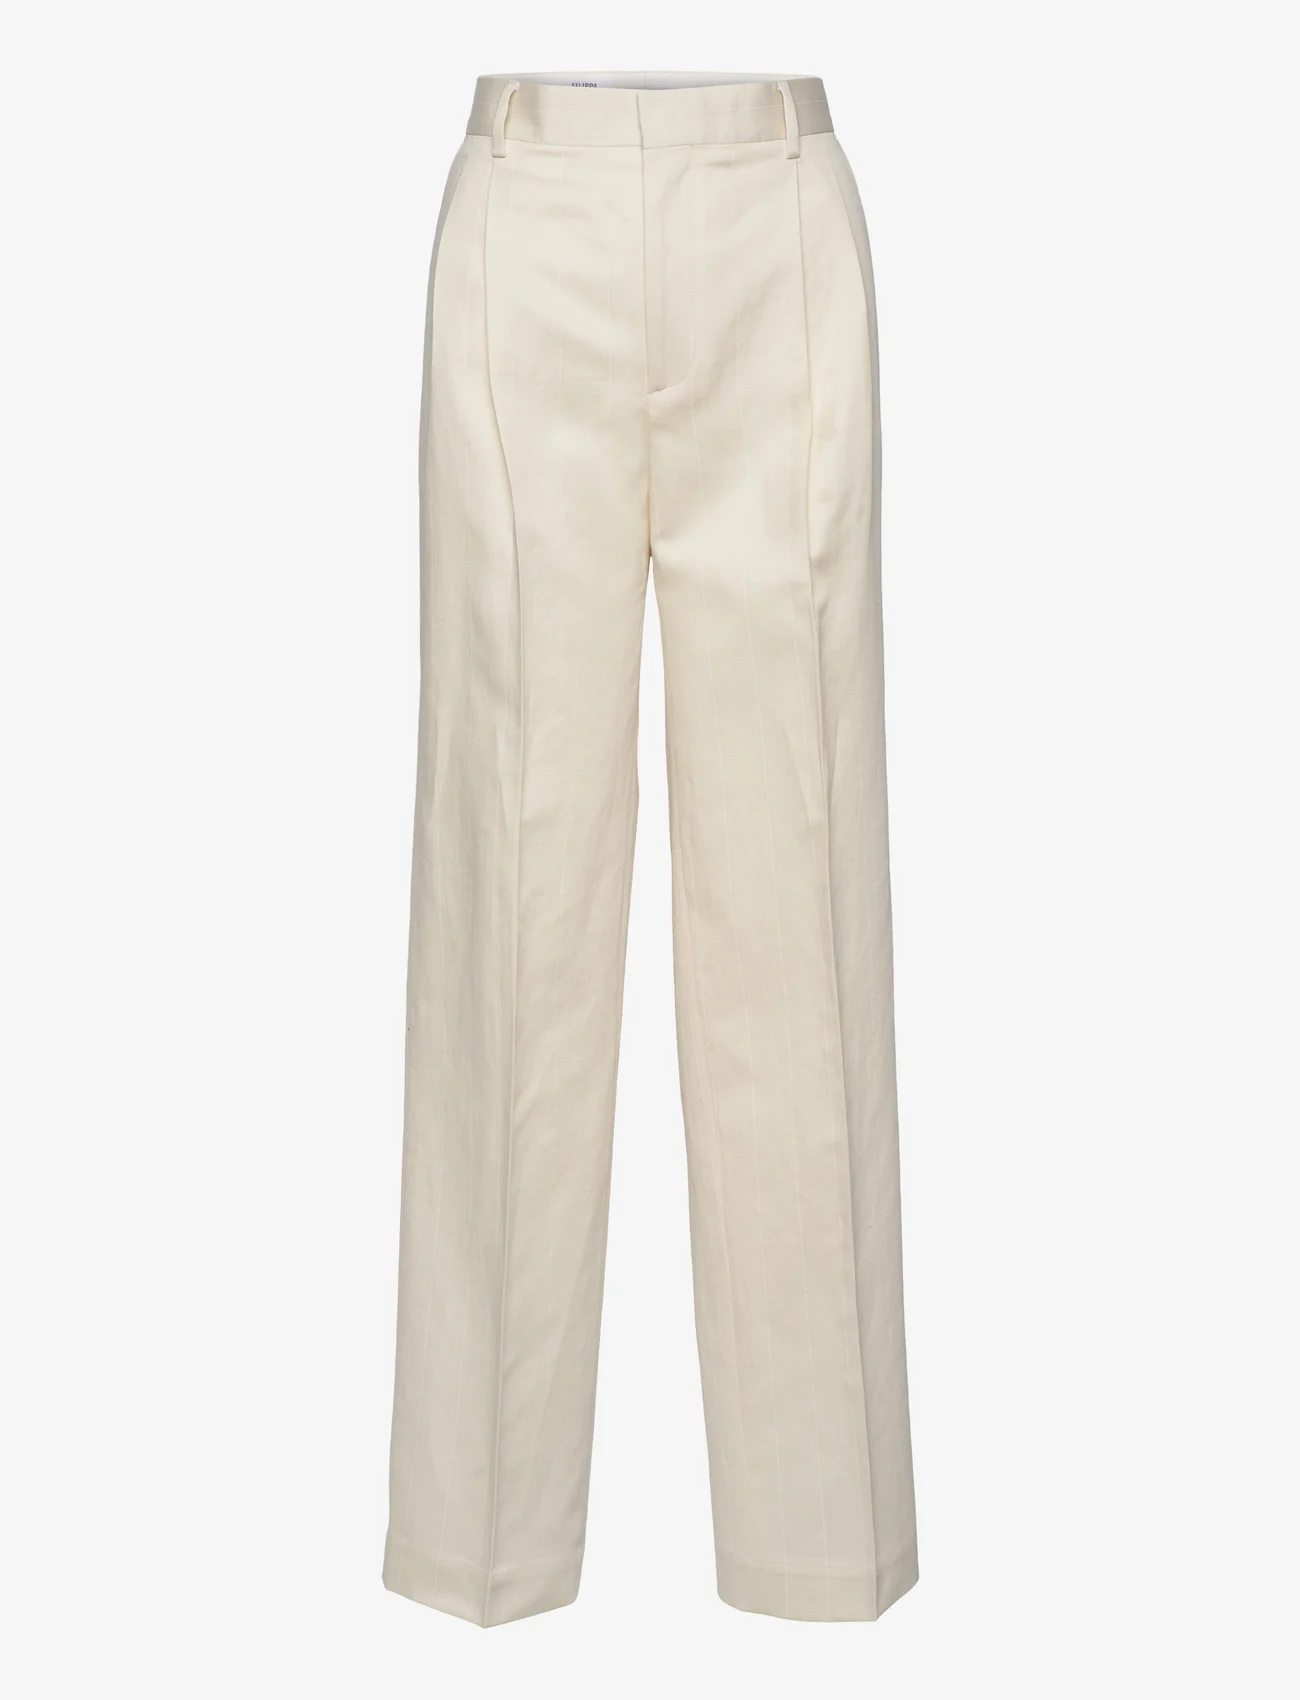 Filippa K - Pleated Pinstripe Trousers - party wear at outlet prices - bone white - 0